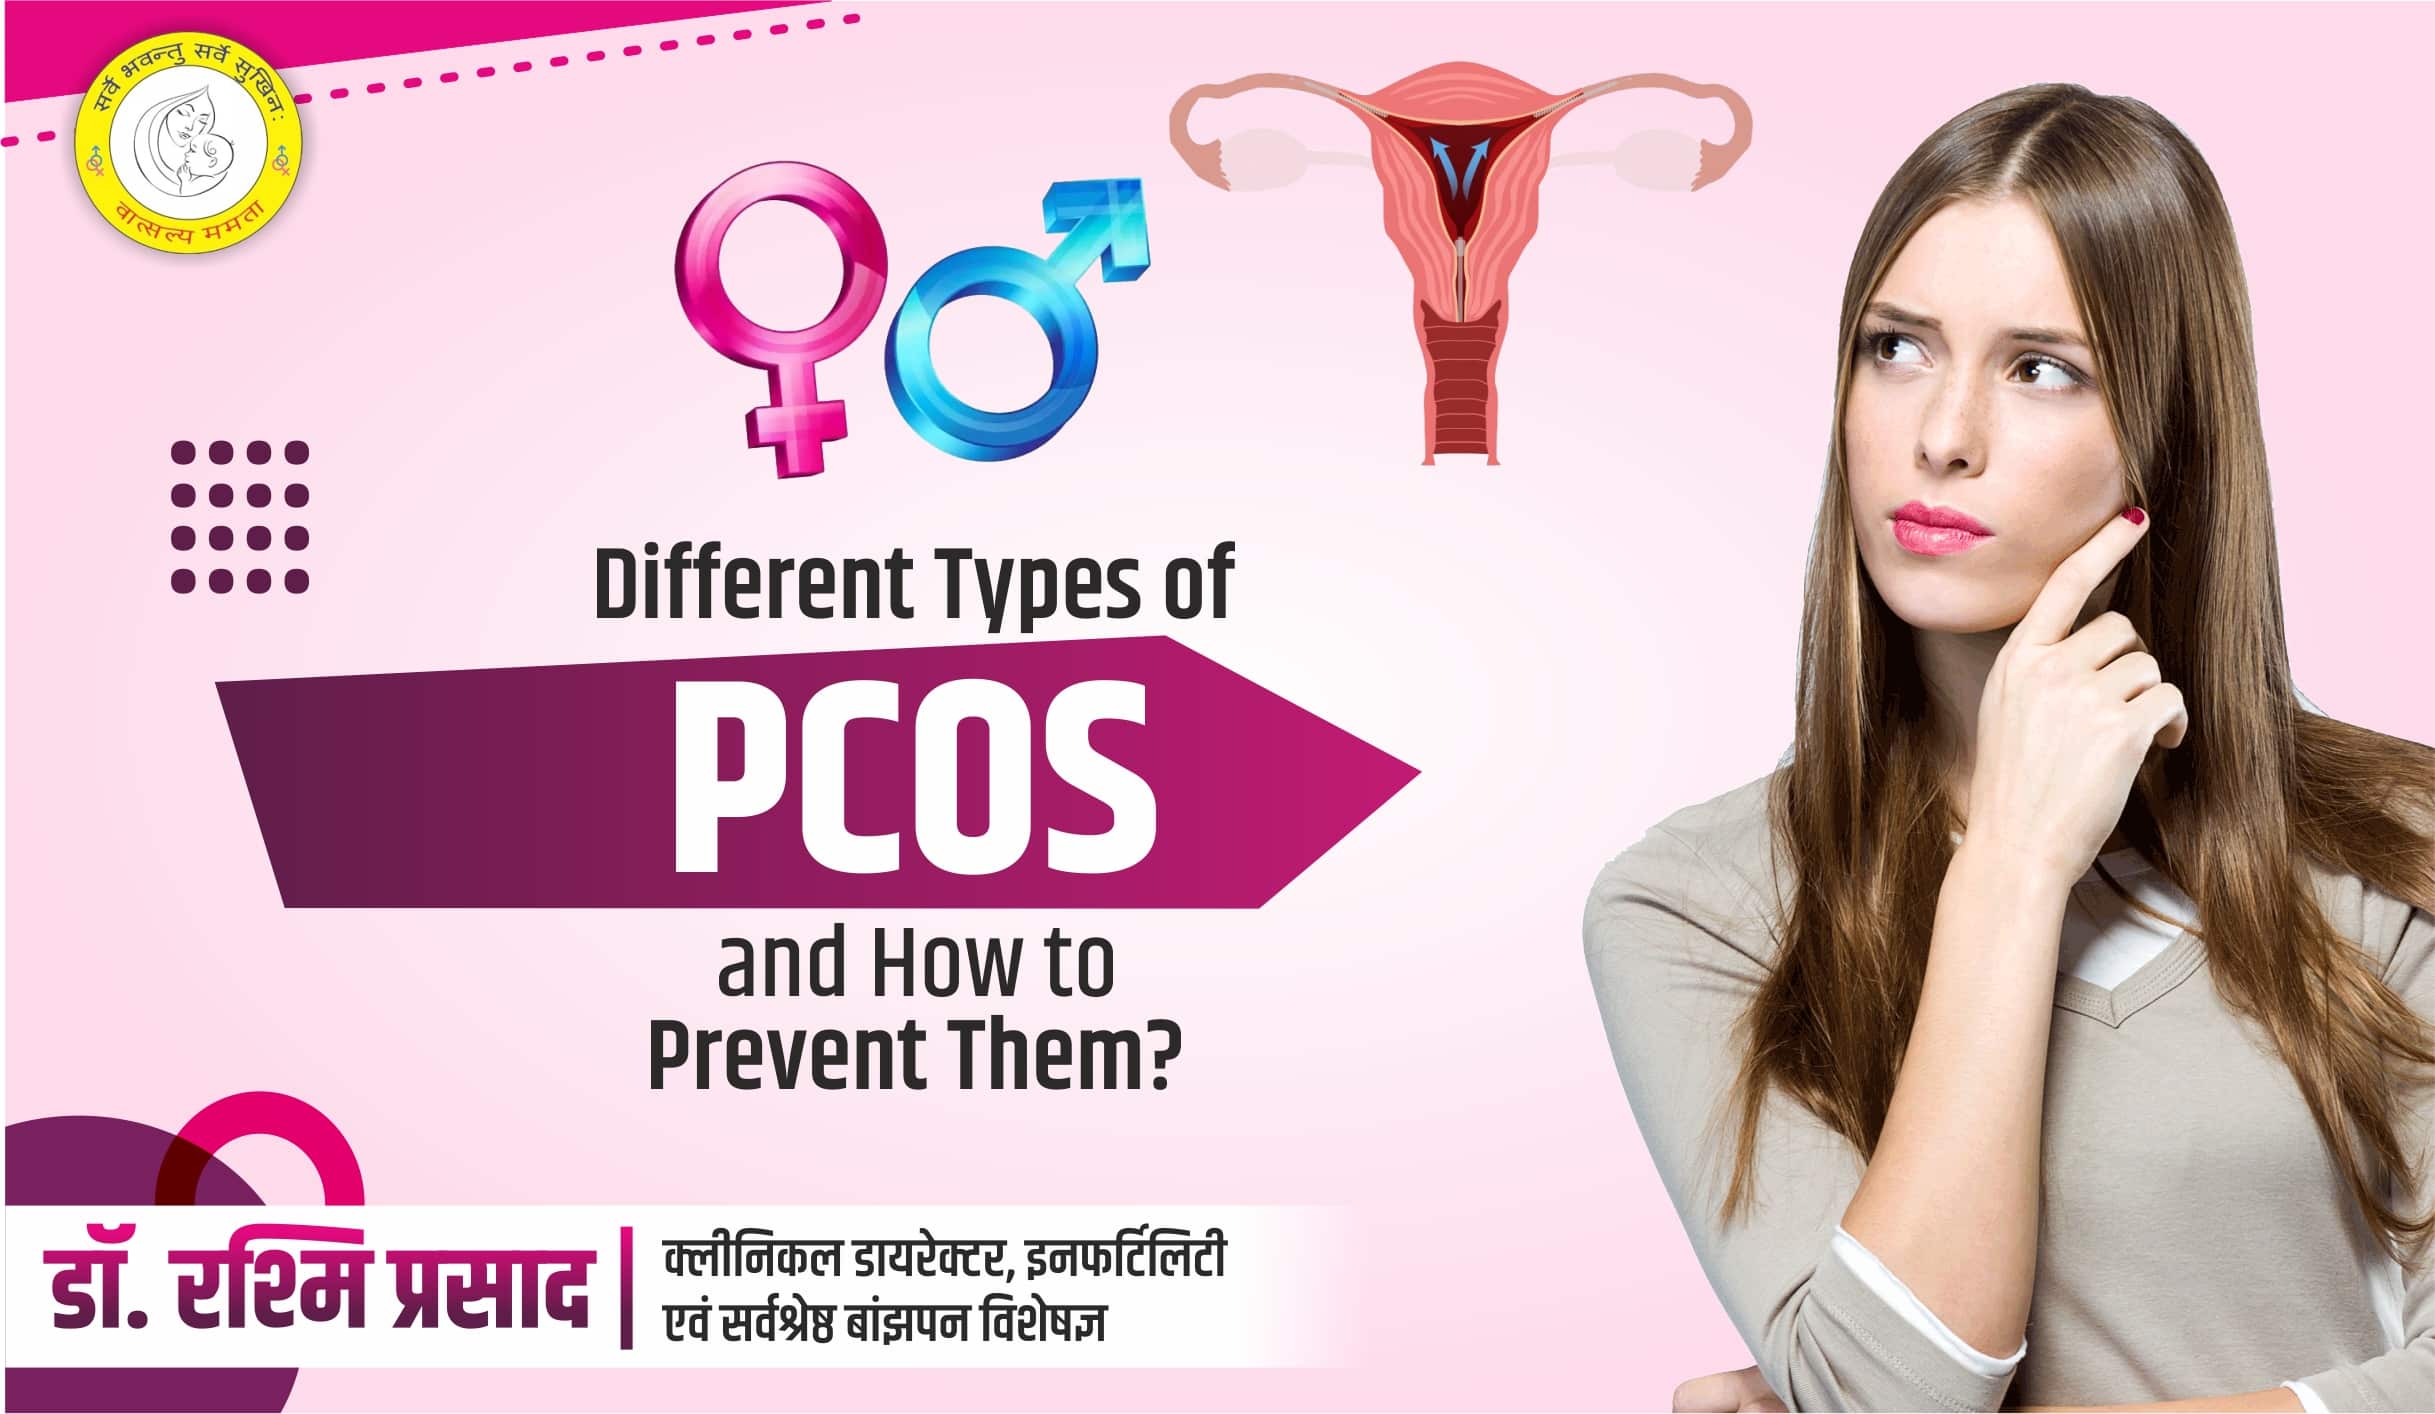 Different Types of PCOS and How to Prevent Them